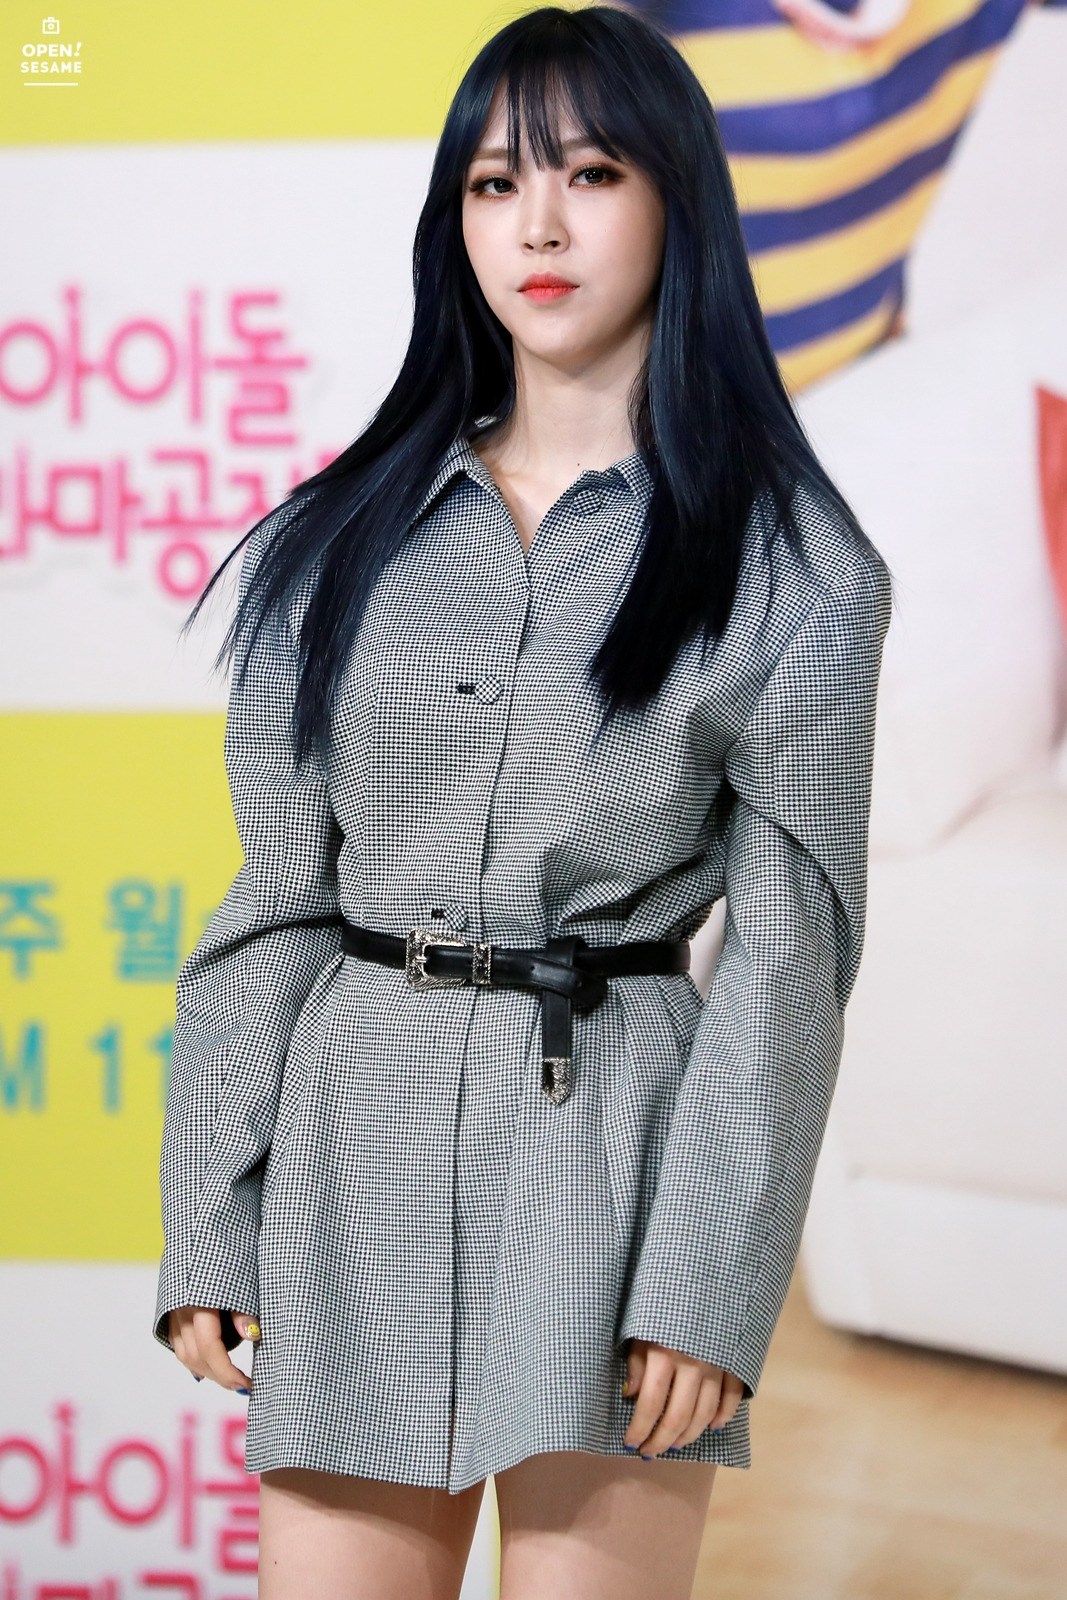 MAMAMOO Moonbyul's new hair changes color depending on the 